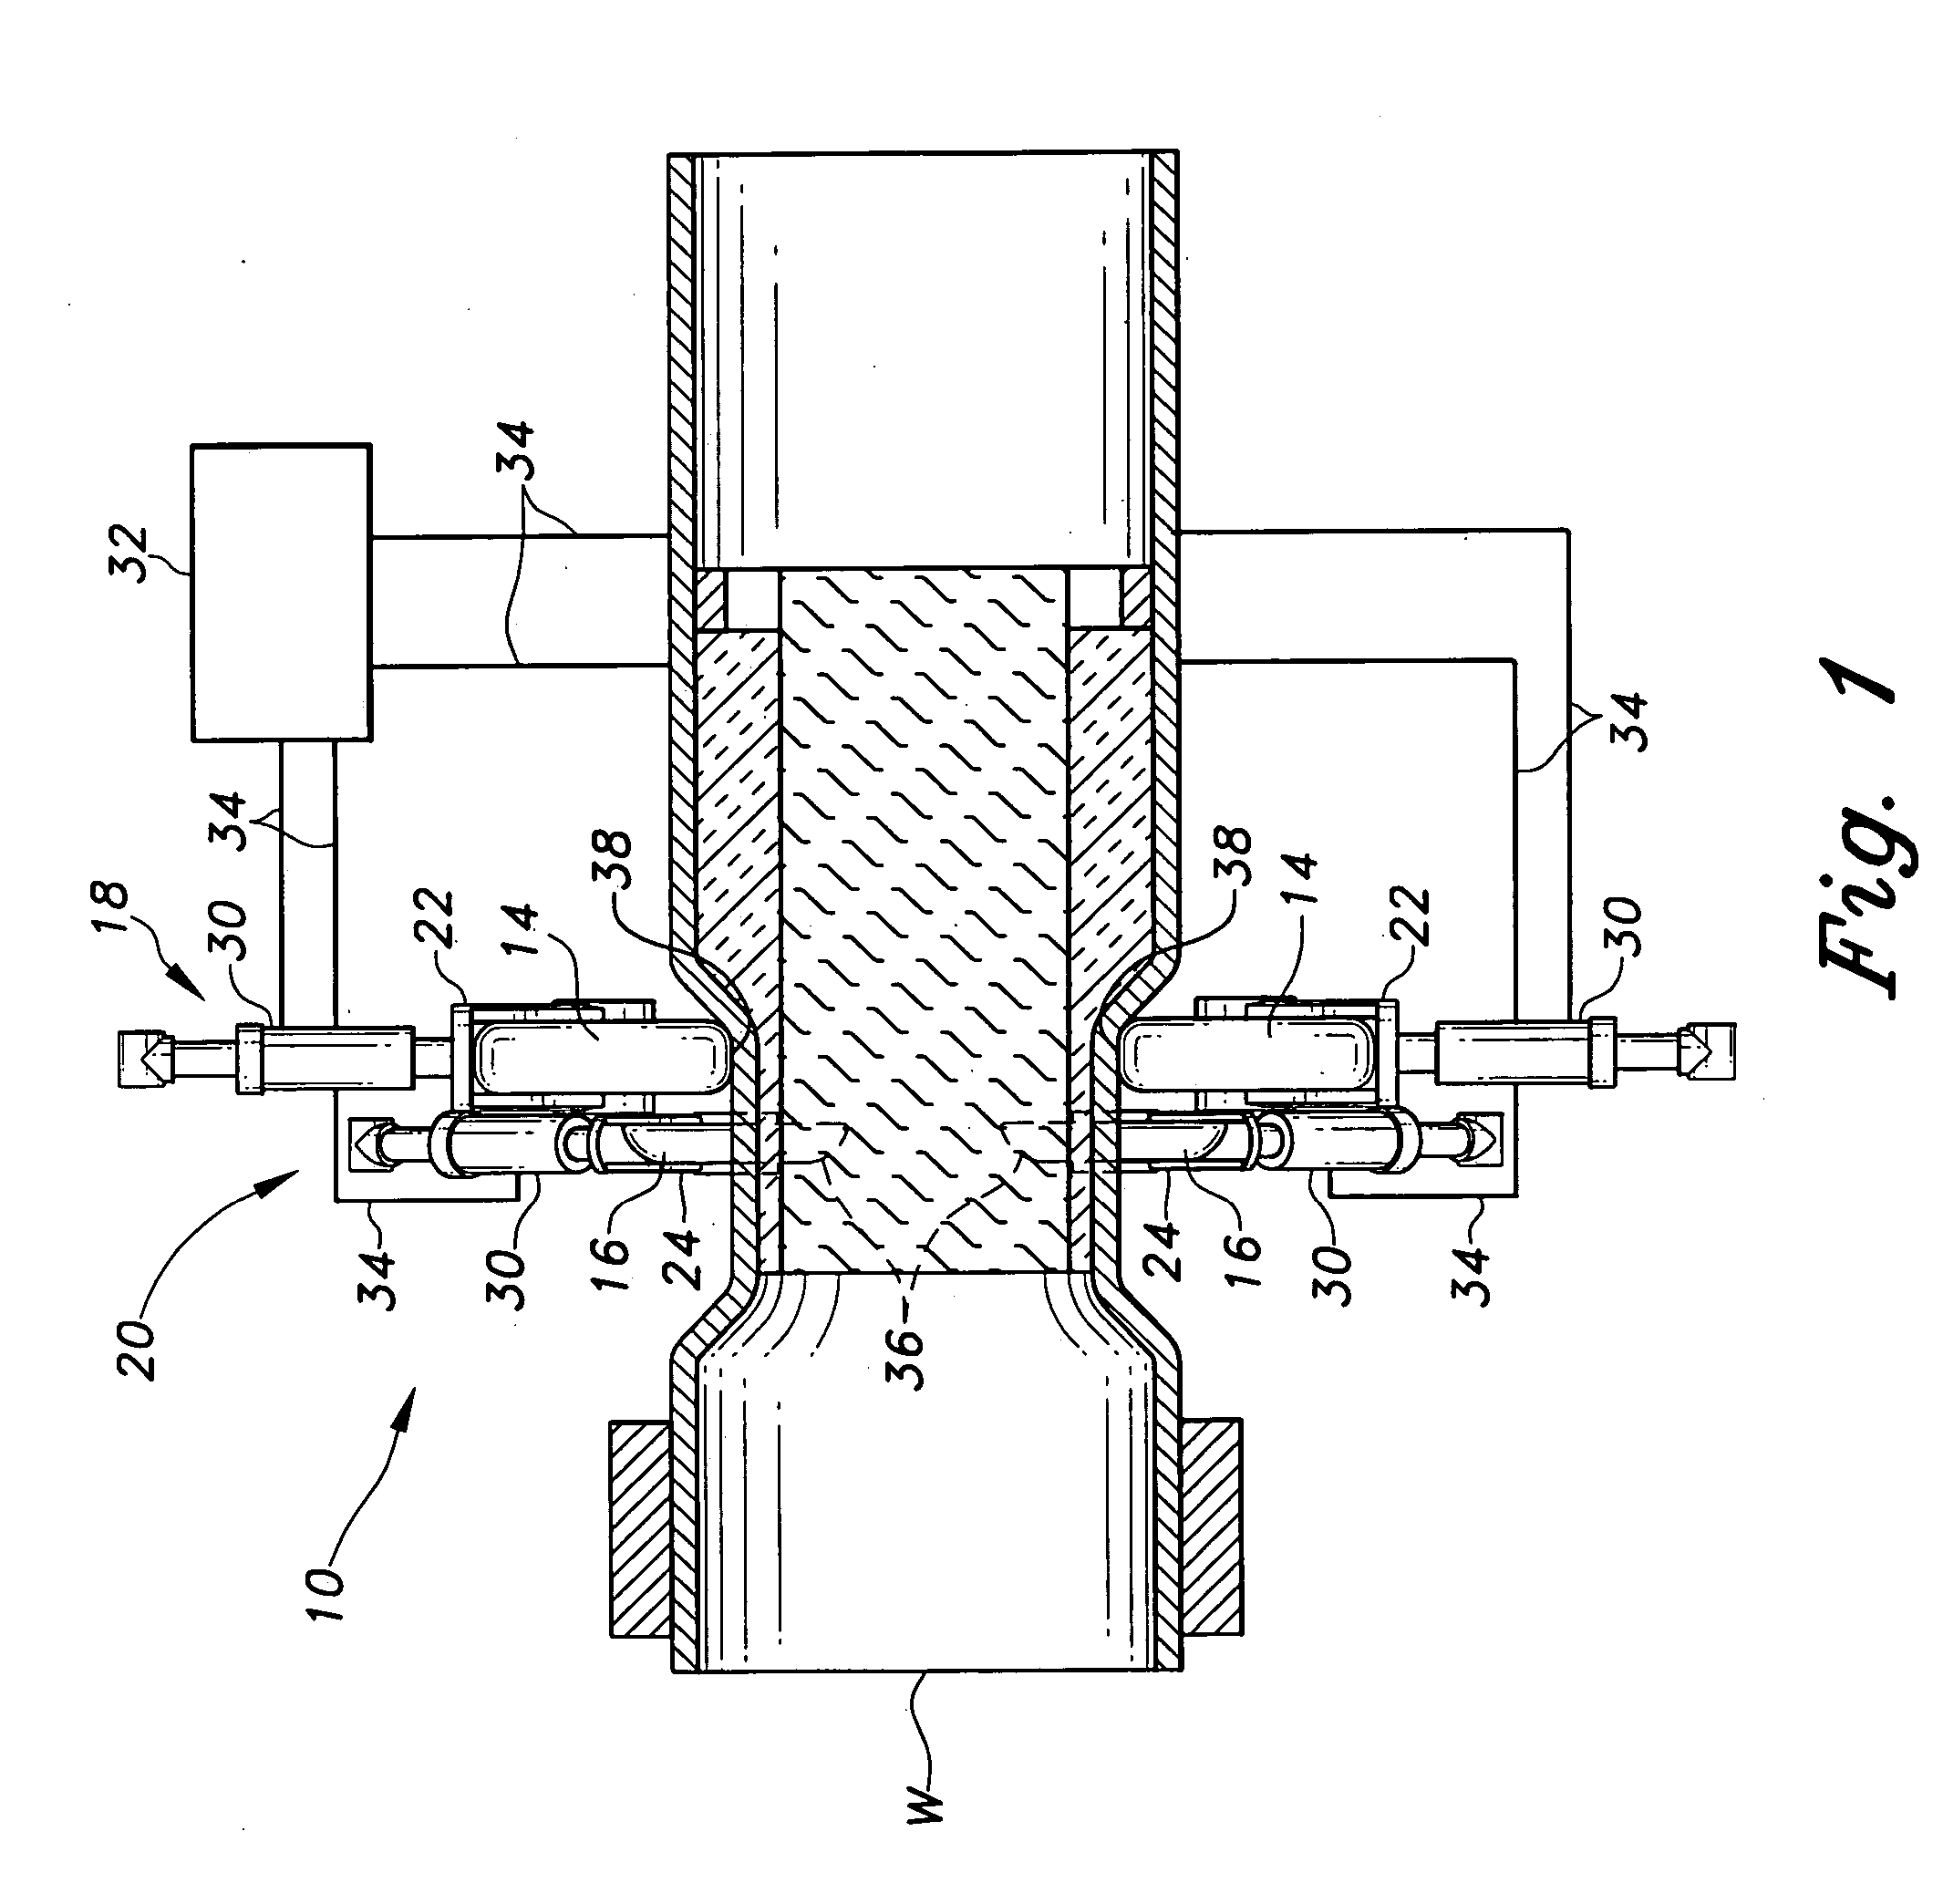 Metal spin forming head